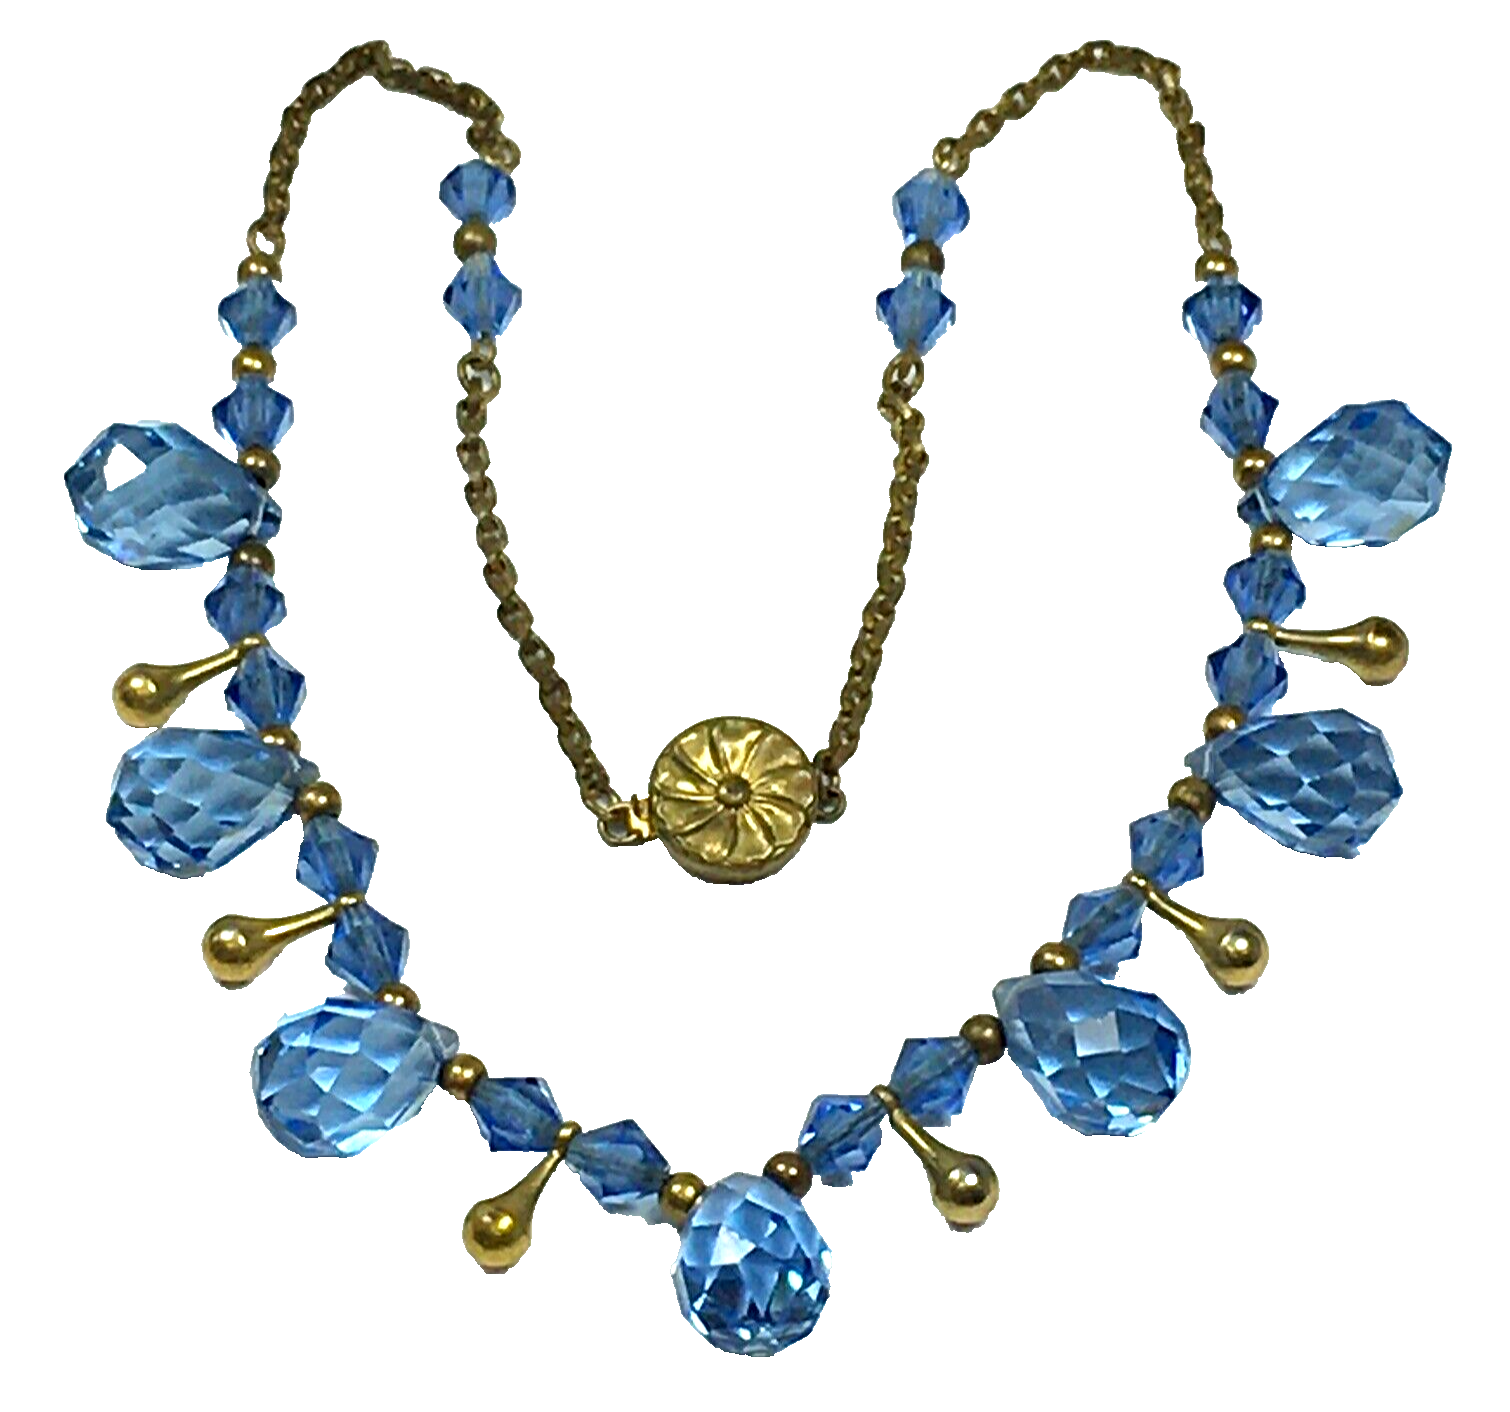 Primary image for Art Deco Blue Faceted Briolette Teardrop Art Glass Beads Necklace